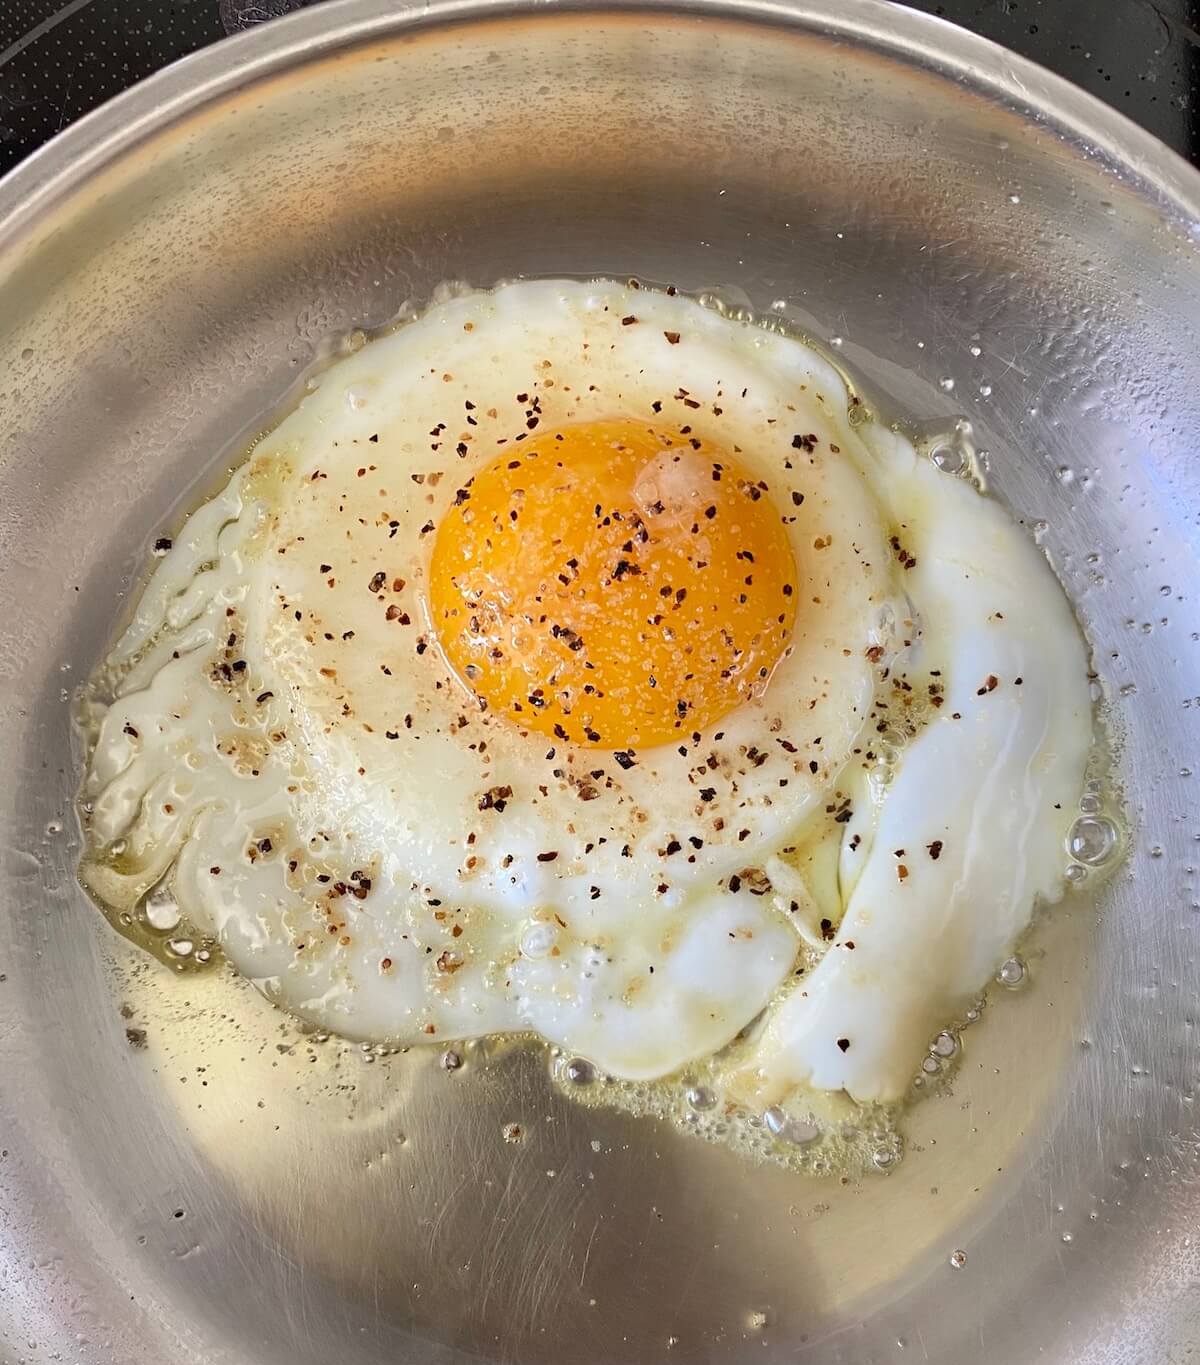 An egg frying in a pan on the stove top.